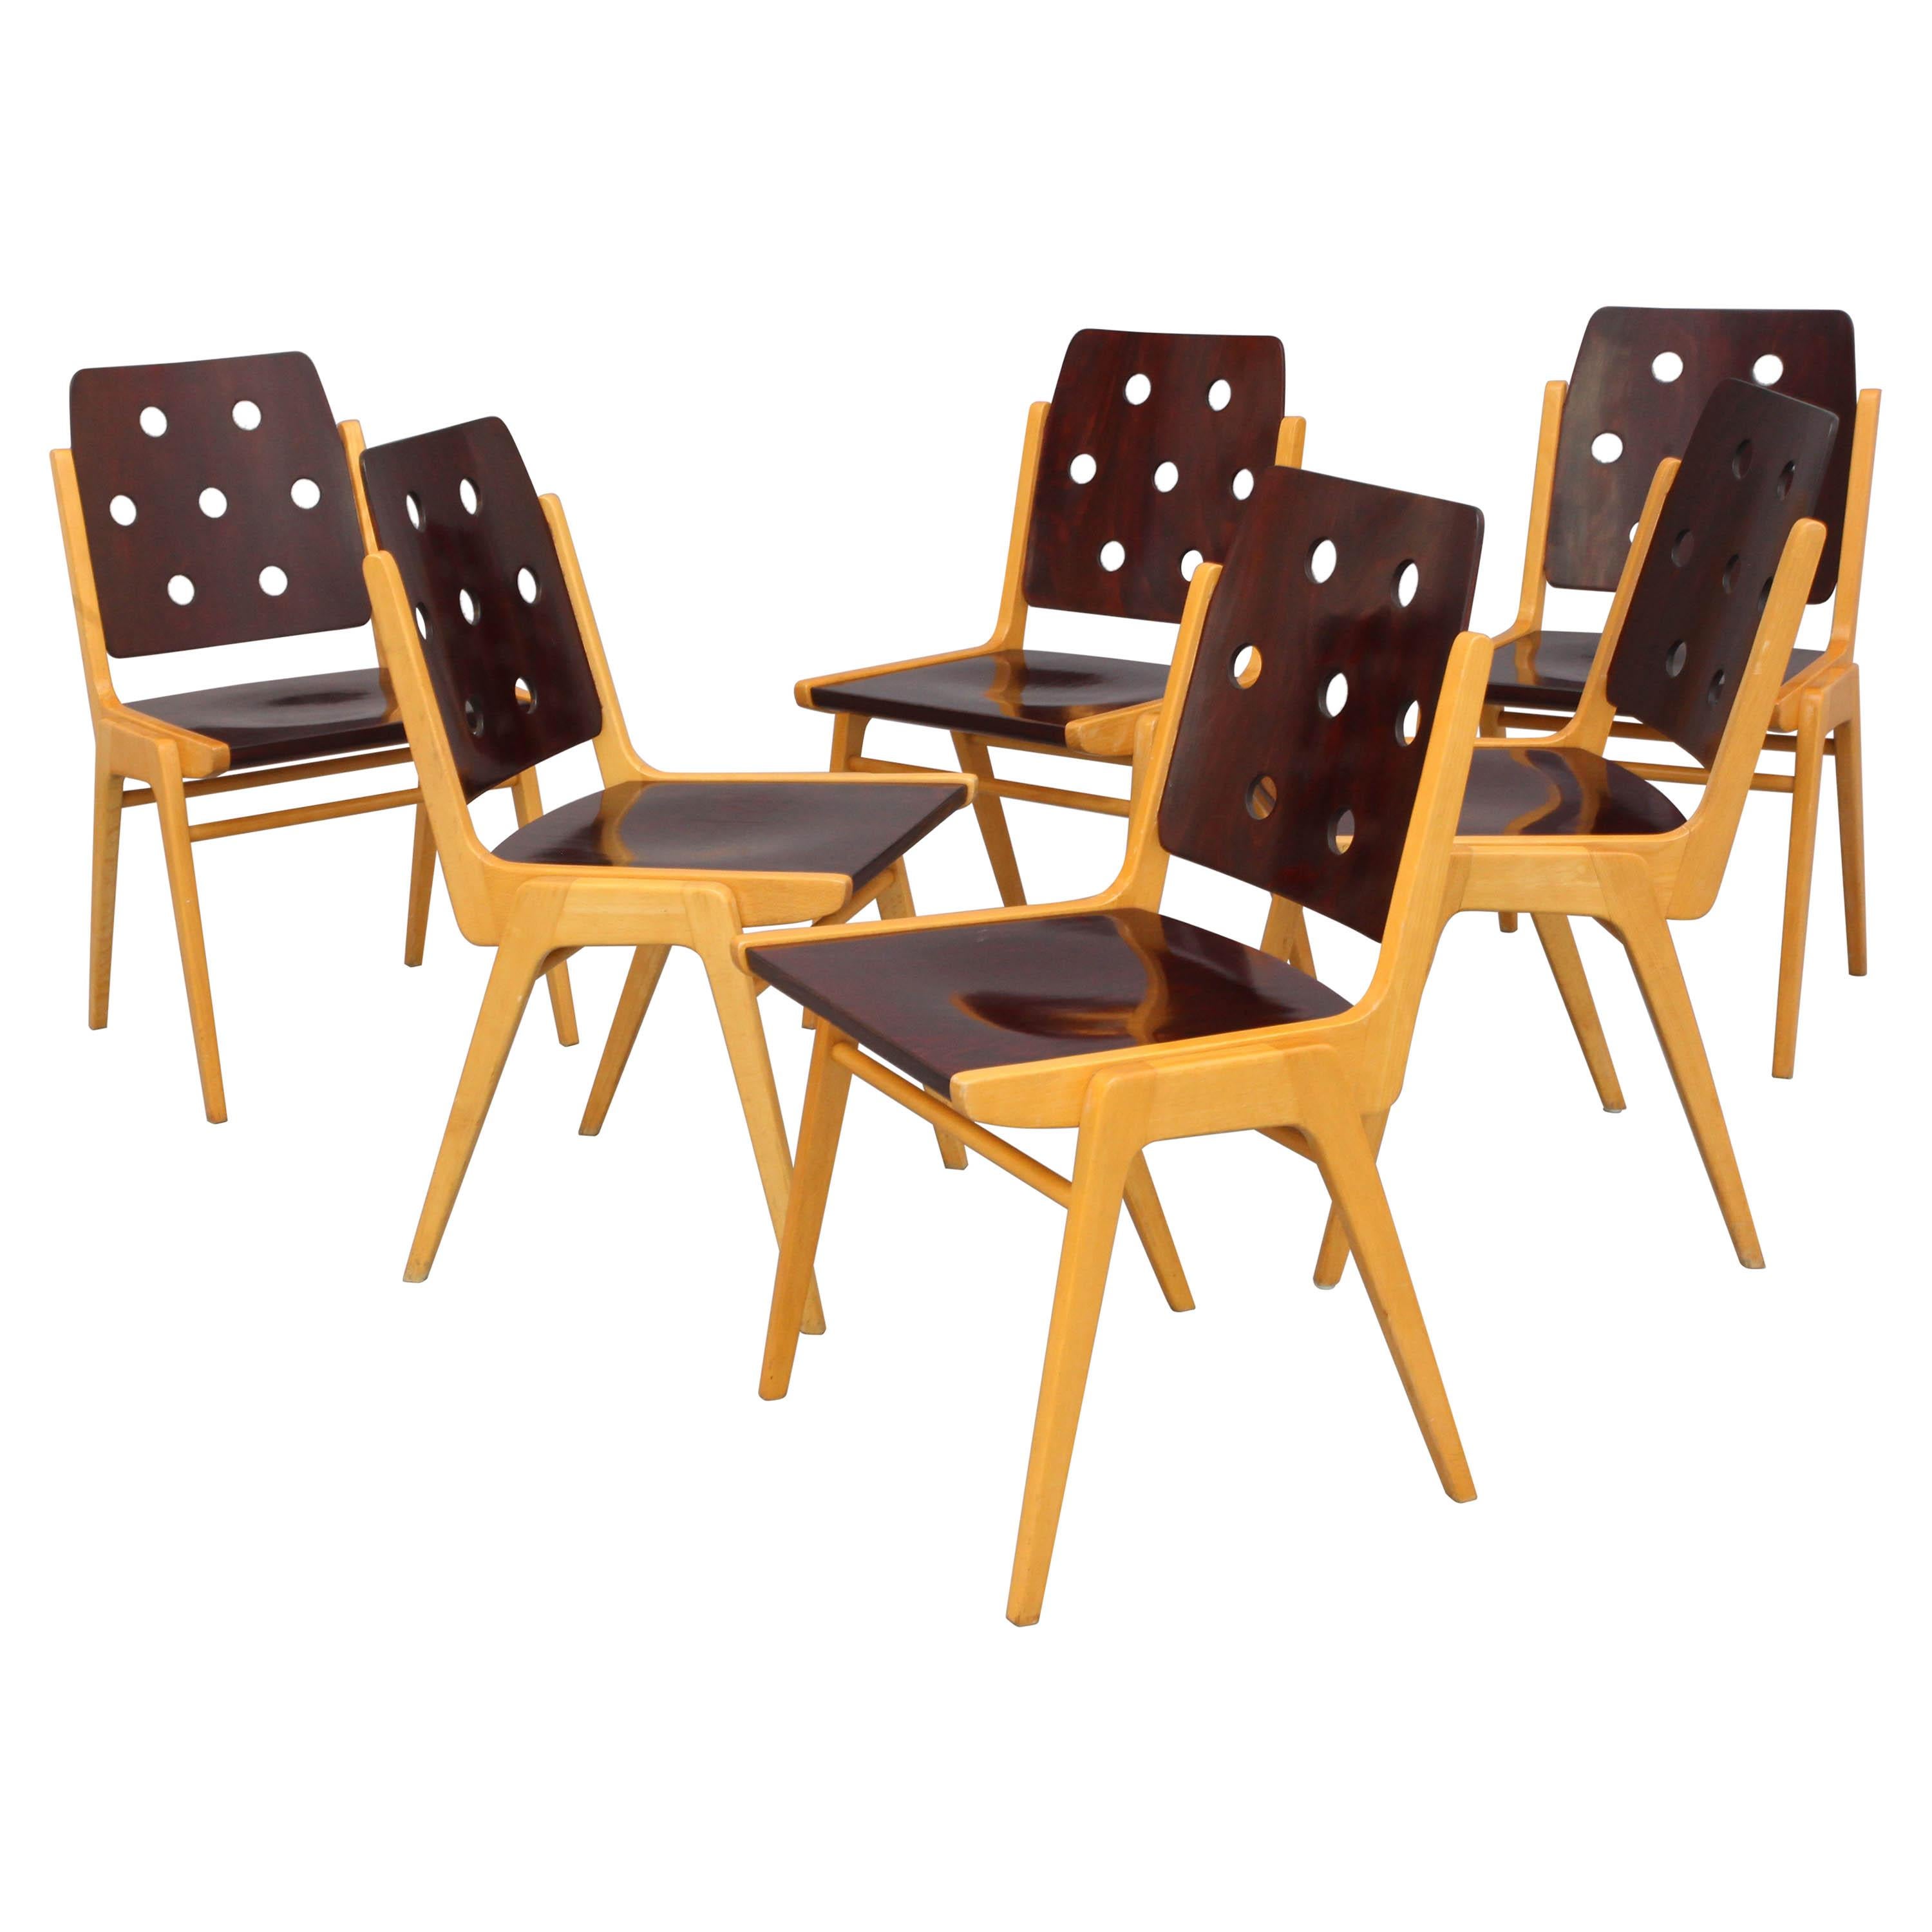 Six Stacking Chairs by Franz Schuster for Wiesner Hager, Model Maestro